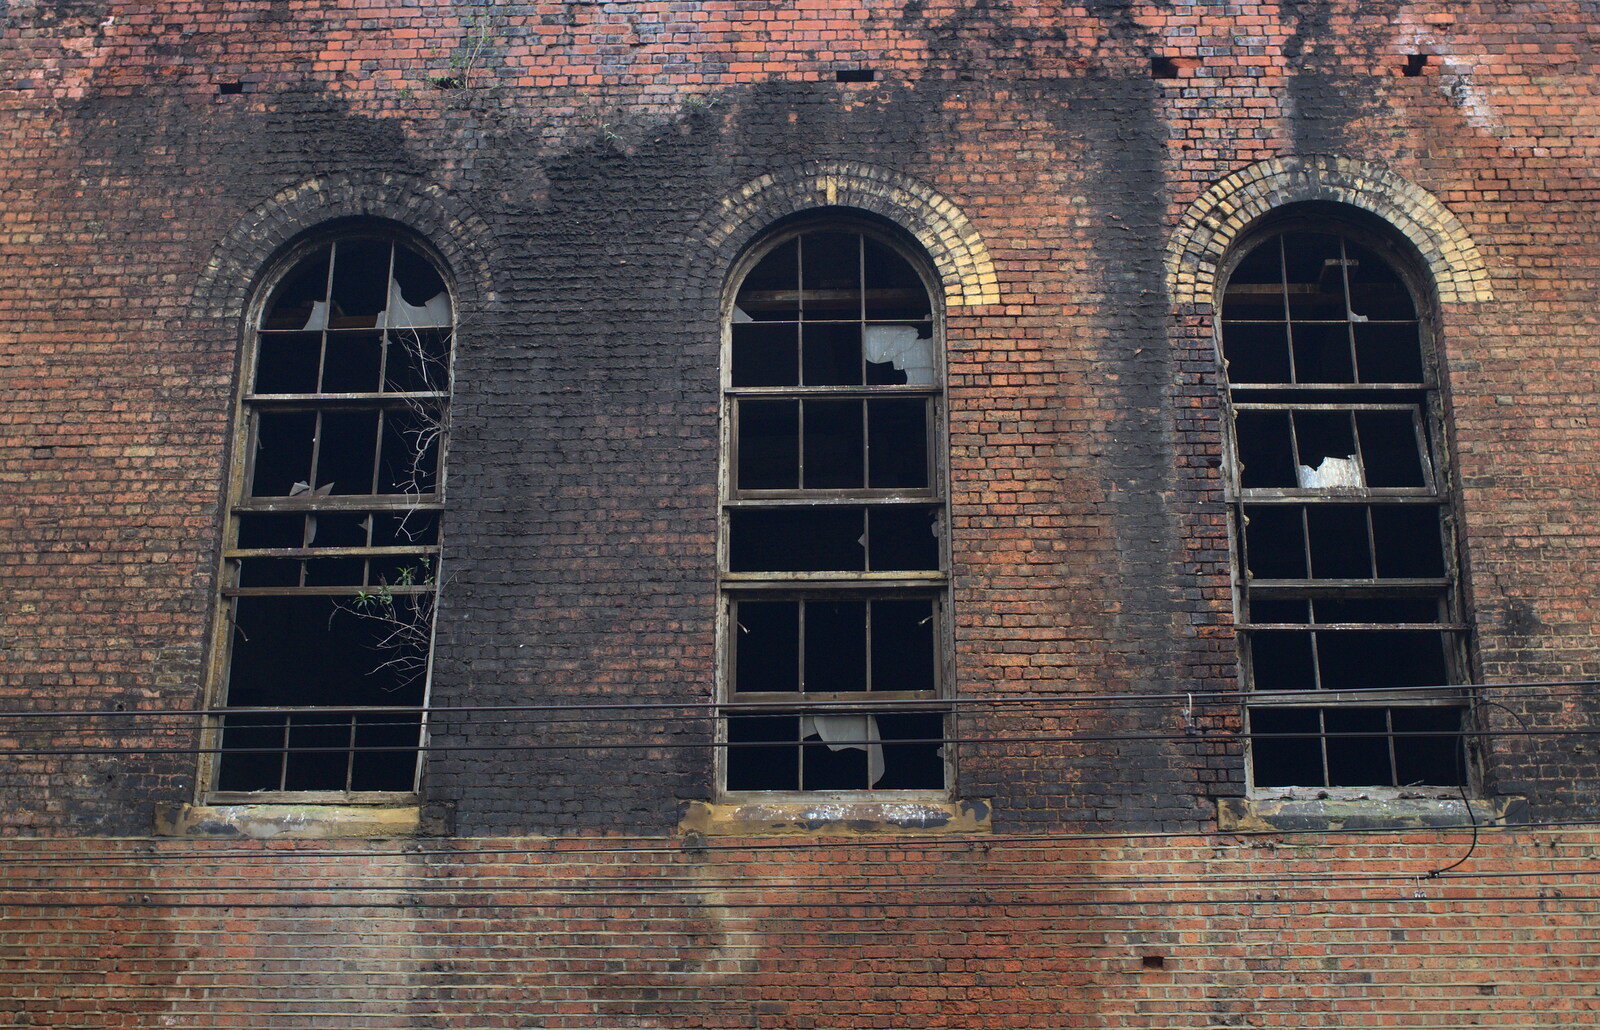 Smashed windows from Demolition of the Bacon Factory, and Railway Dereliction, Ipswich and London - 5th March 2013